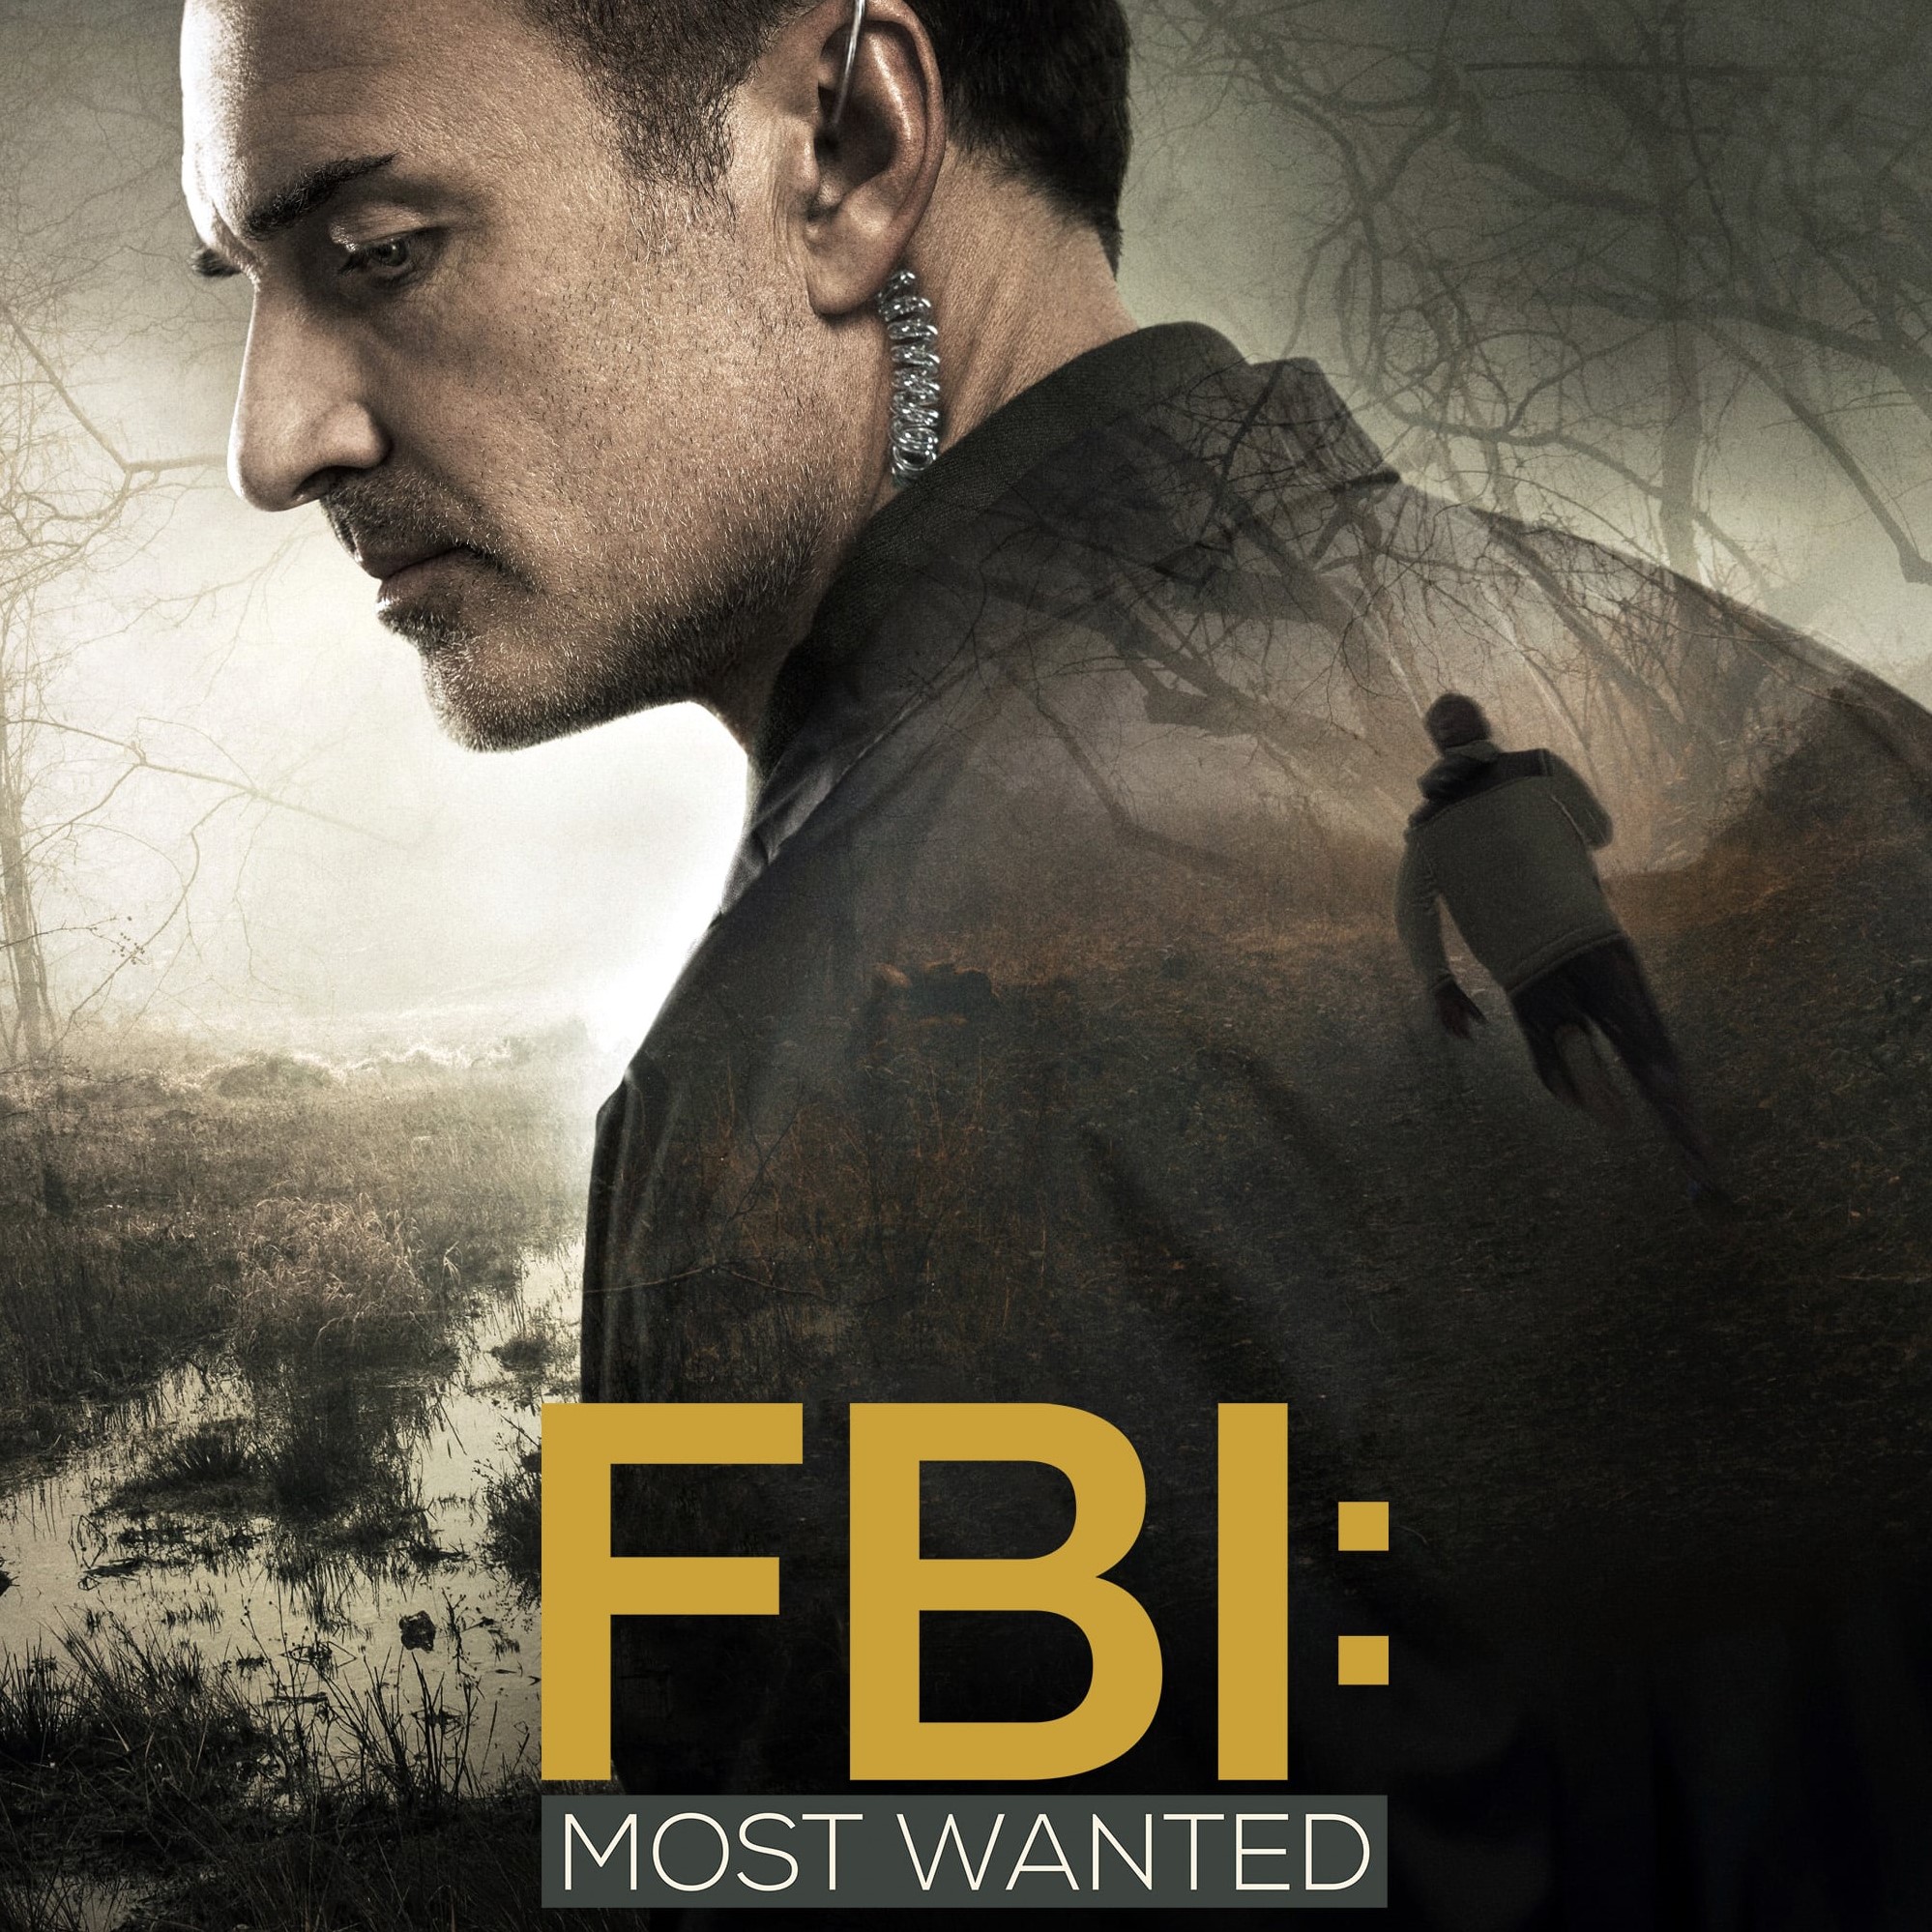 FBI Most Wanted television series